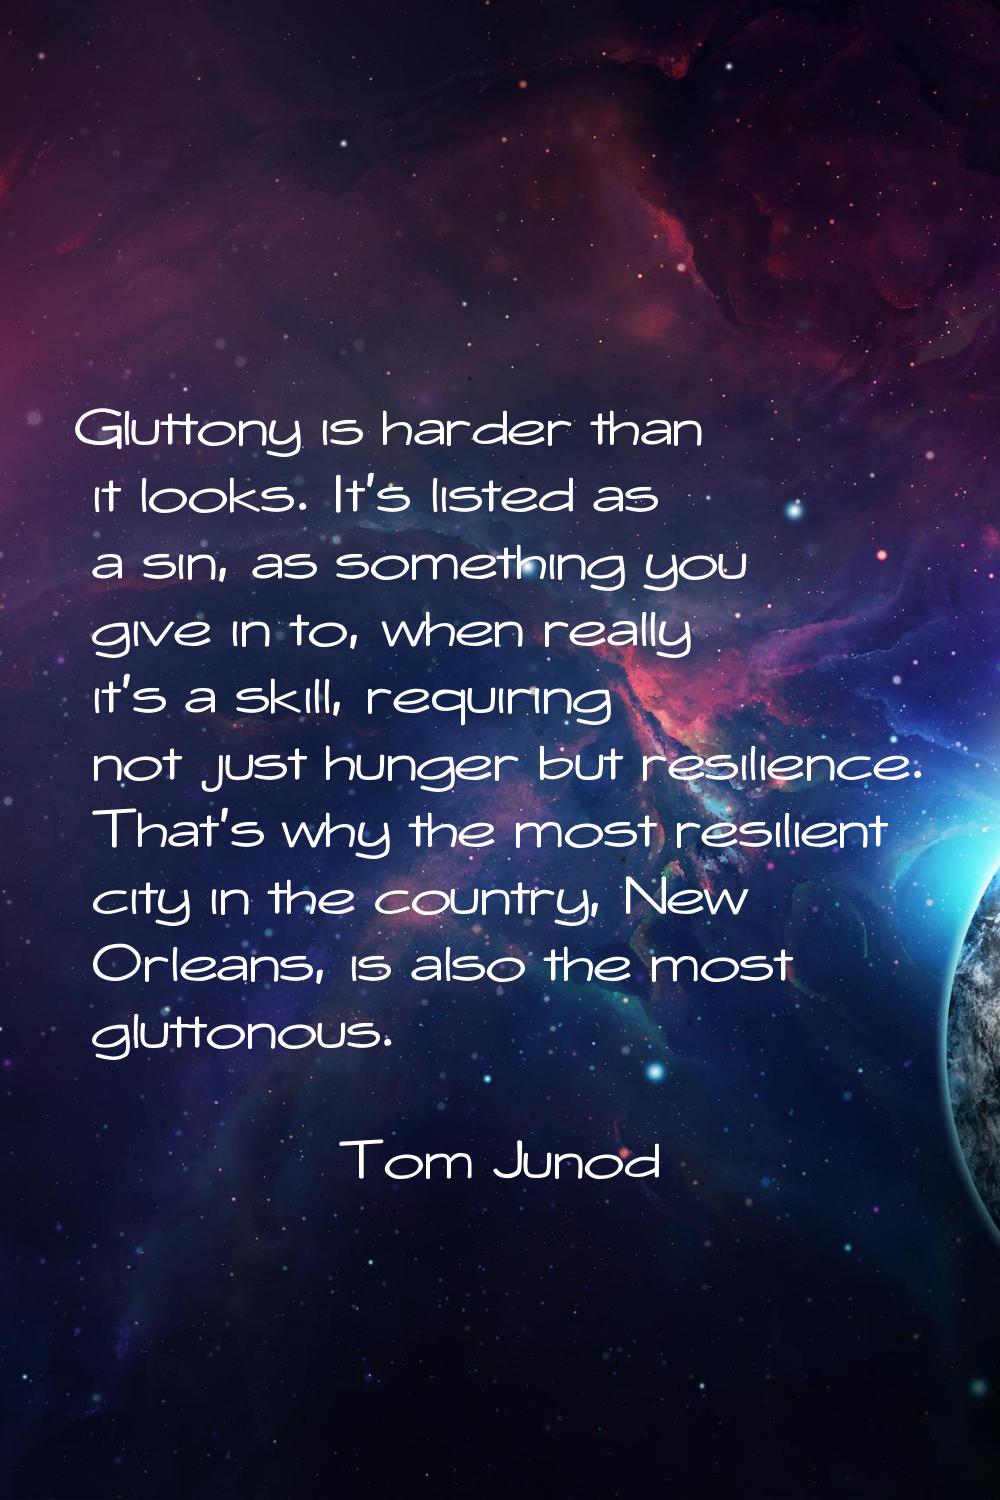 Gluttony is harder than it looks. It's listed as a sin, as something you give in to, when really it